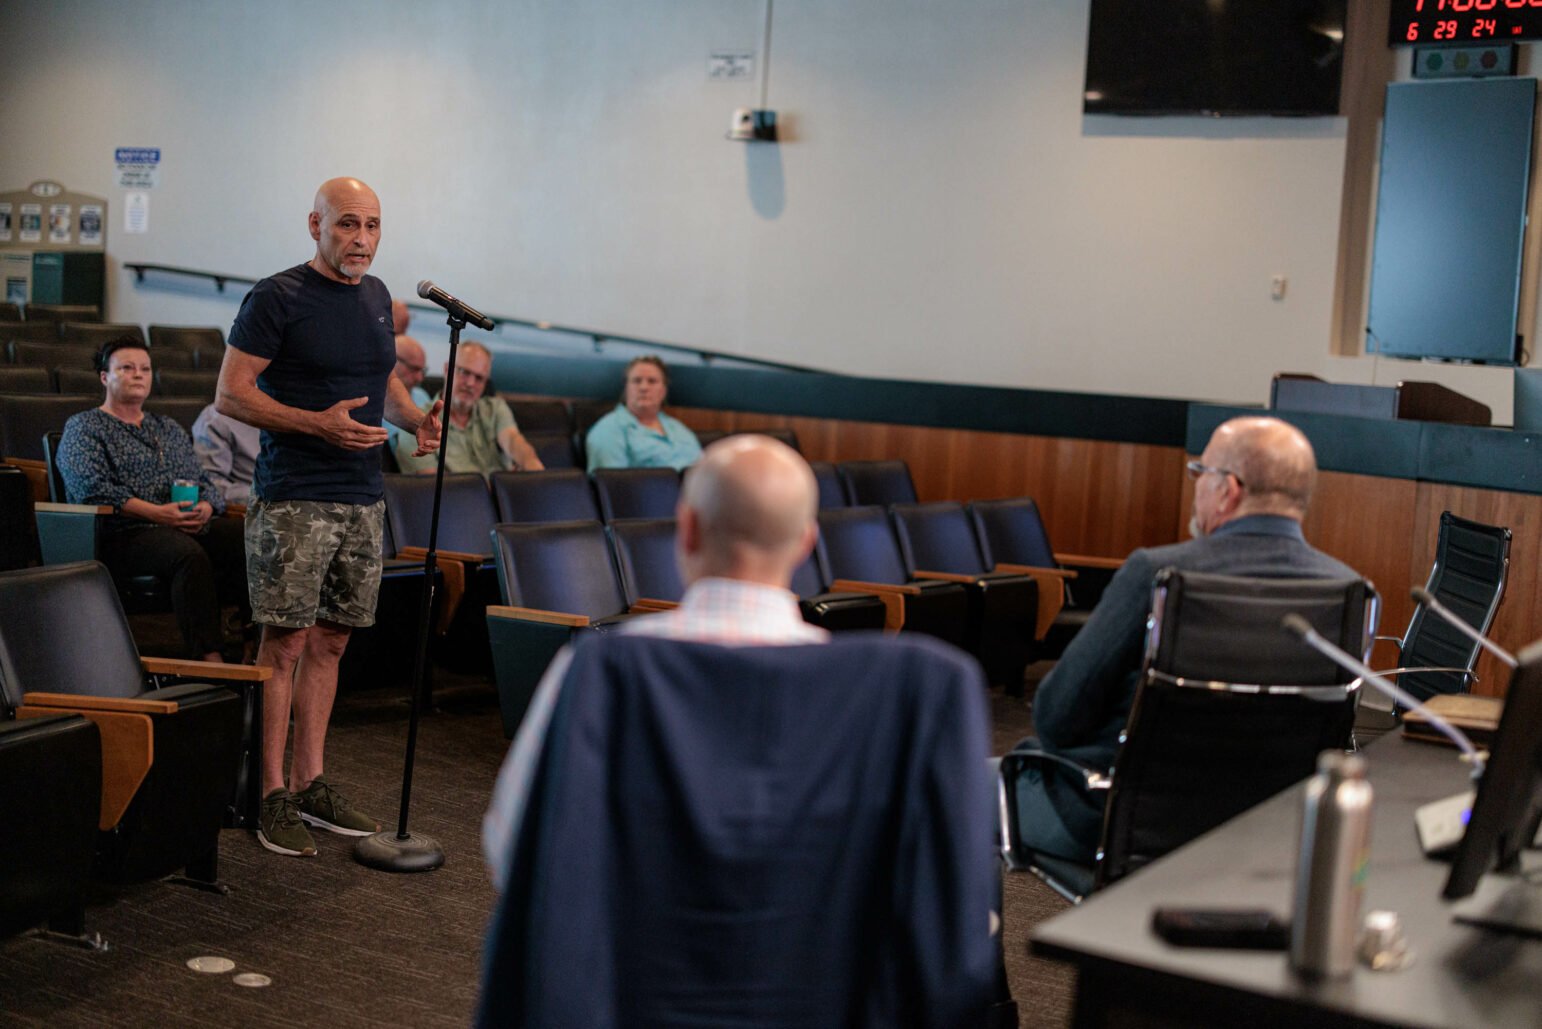 A man in a dark shirt and camouflage shorts stands at a microphone speaking to an audience during a town hall meeting. Seated behind him are several attendees, including a woman in a blue patterned shirt and a man in a green shirt.